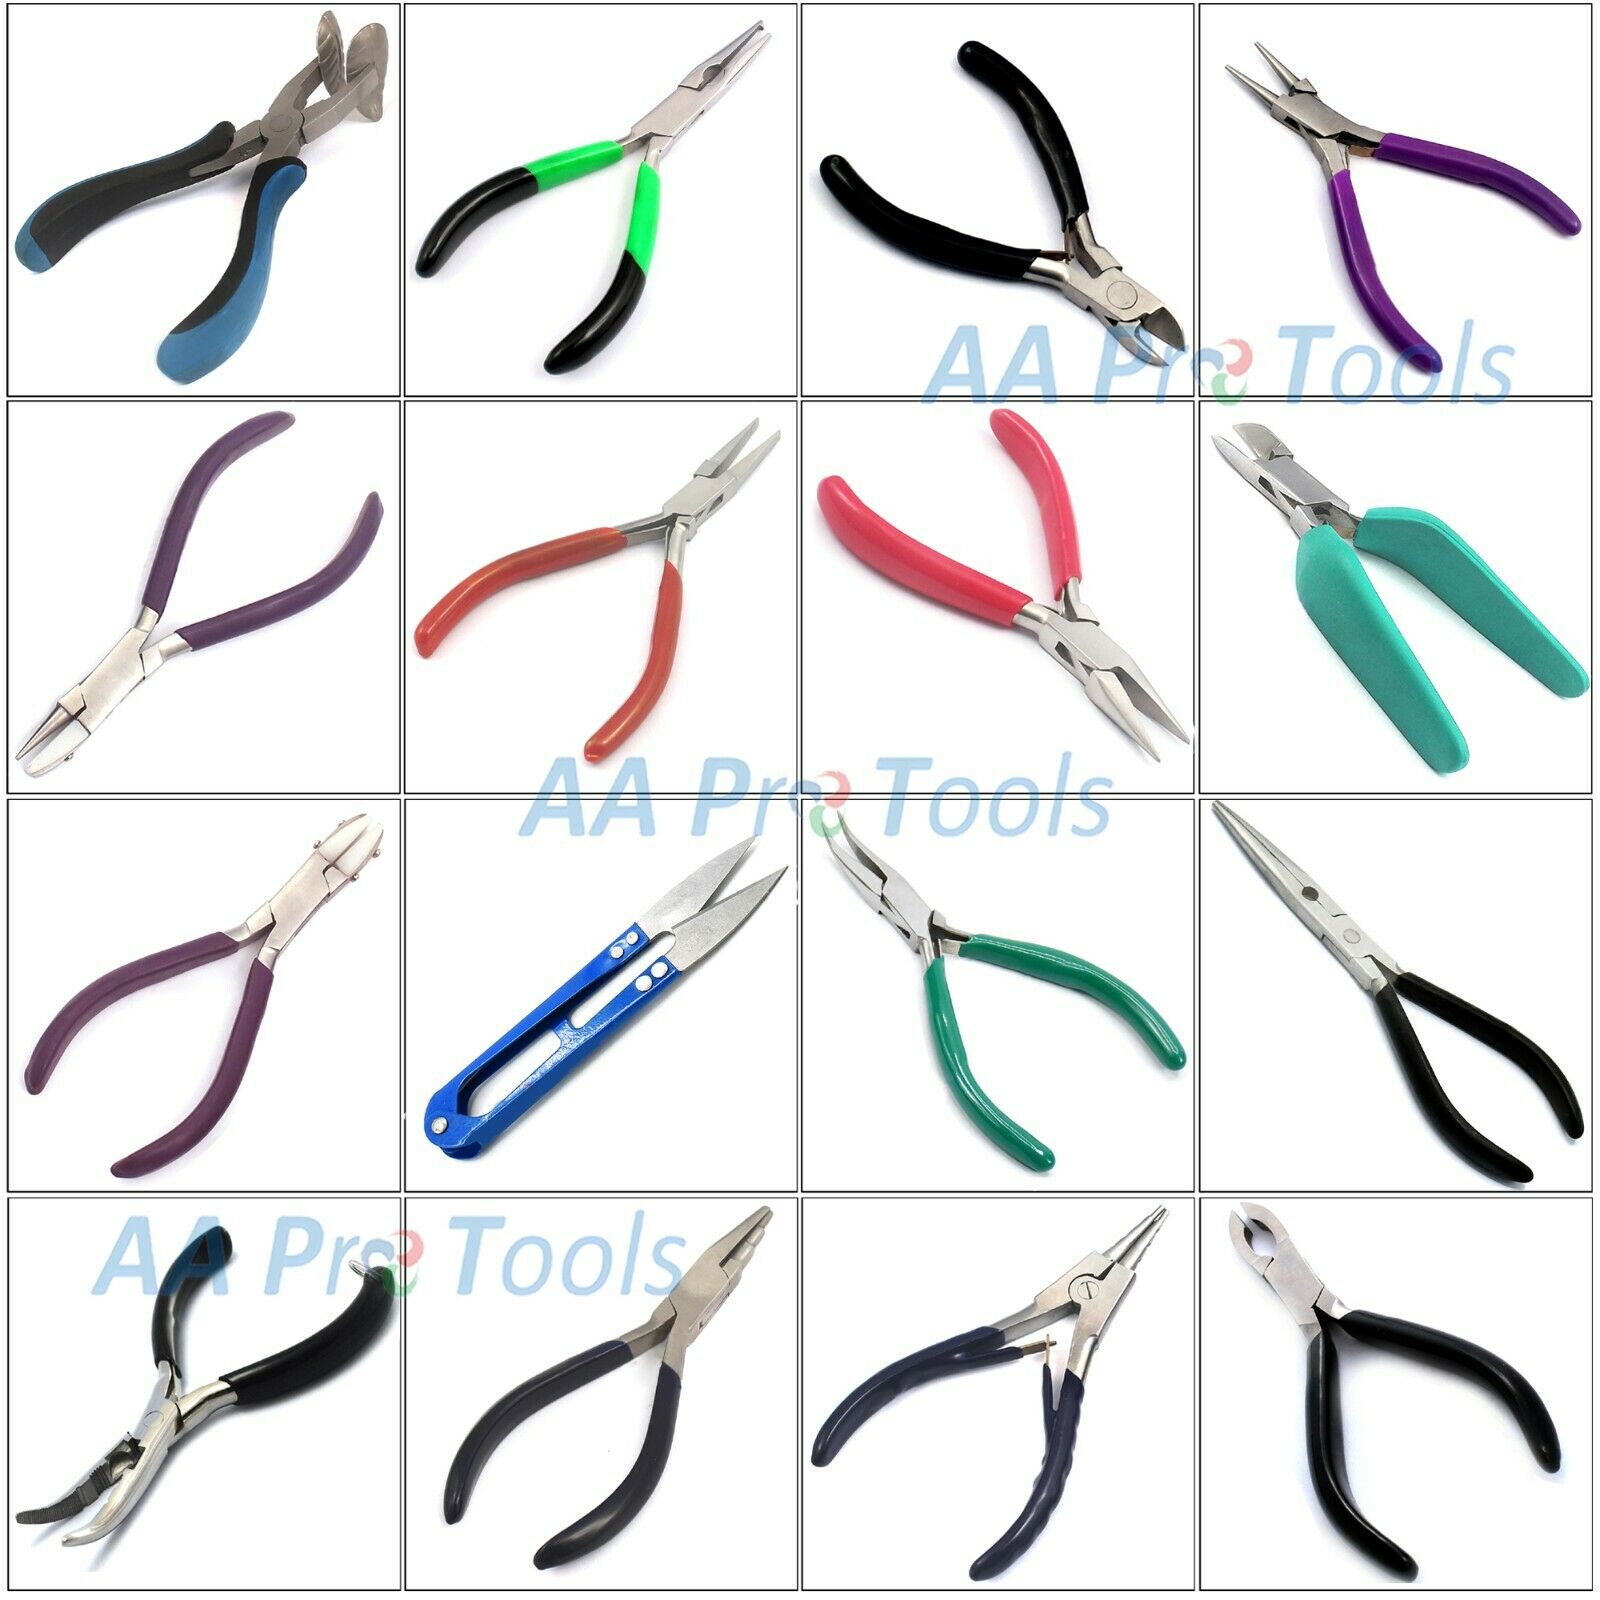 Jewelry Tools Cutter Pliers For Designer Jewelry Making Wire Pliers (choose One)